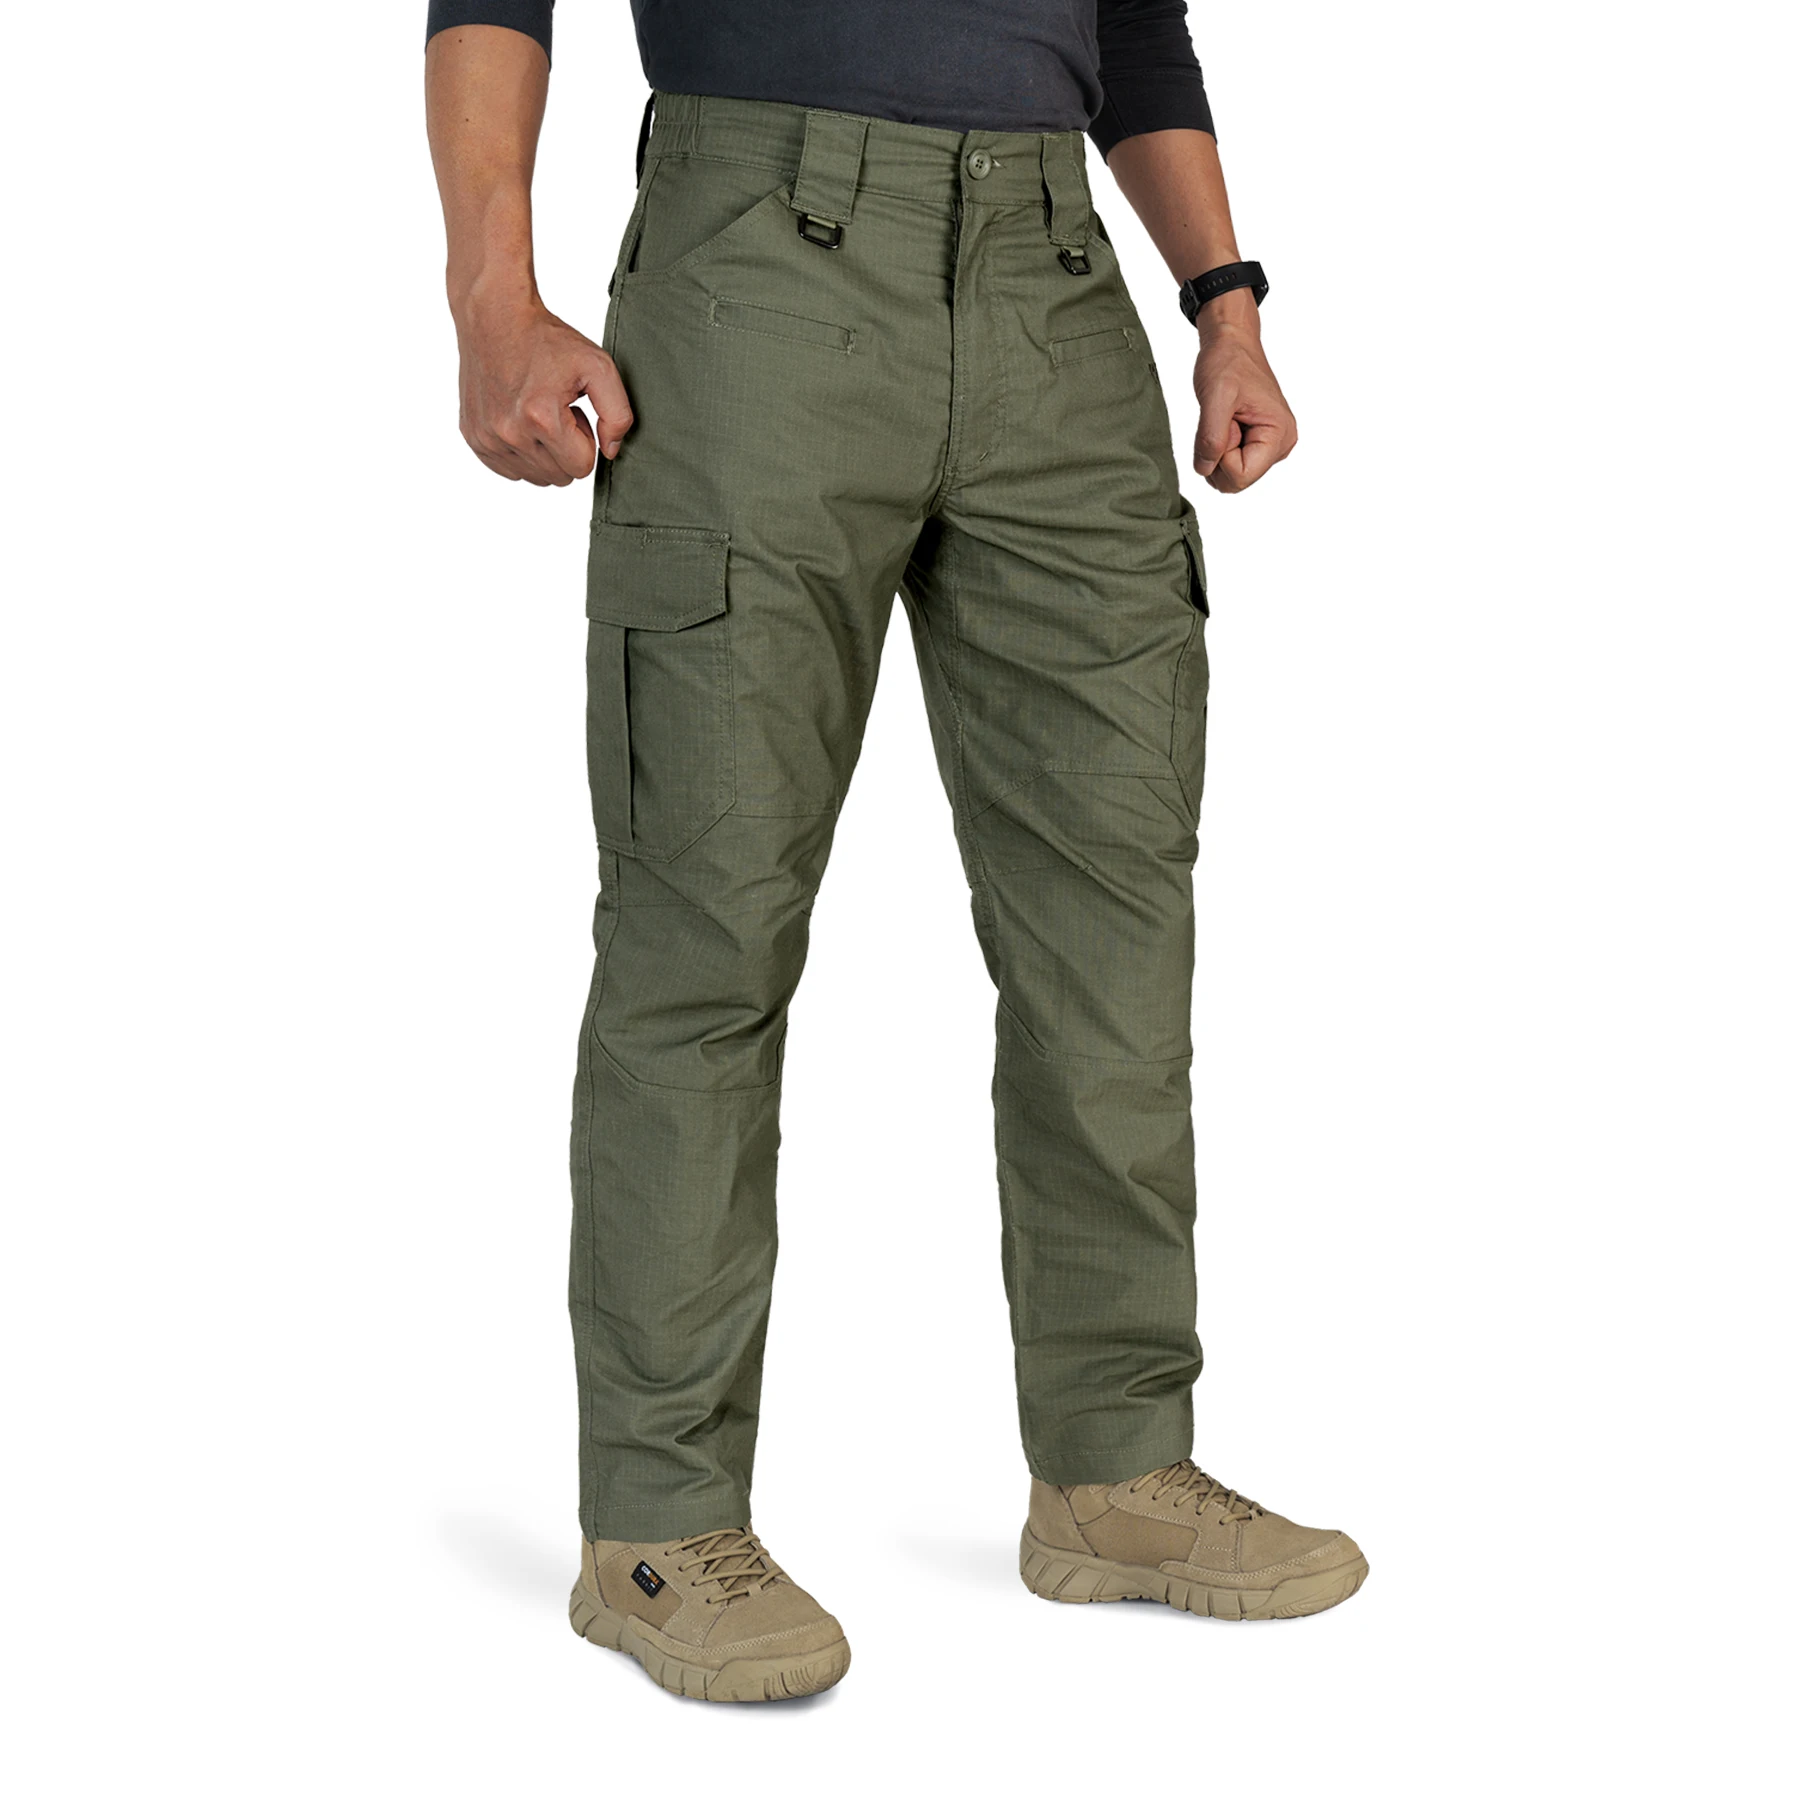 IDOGEAR Tactical Pants With Large Pockets Ranger Green Cargo 3213